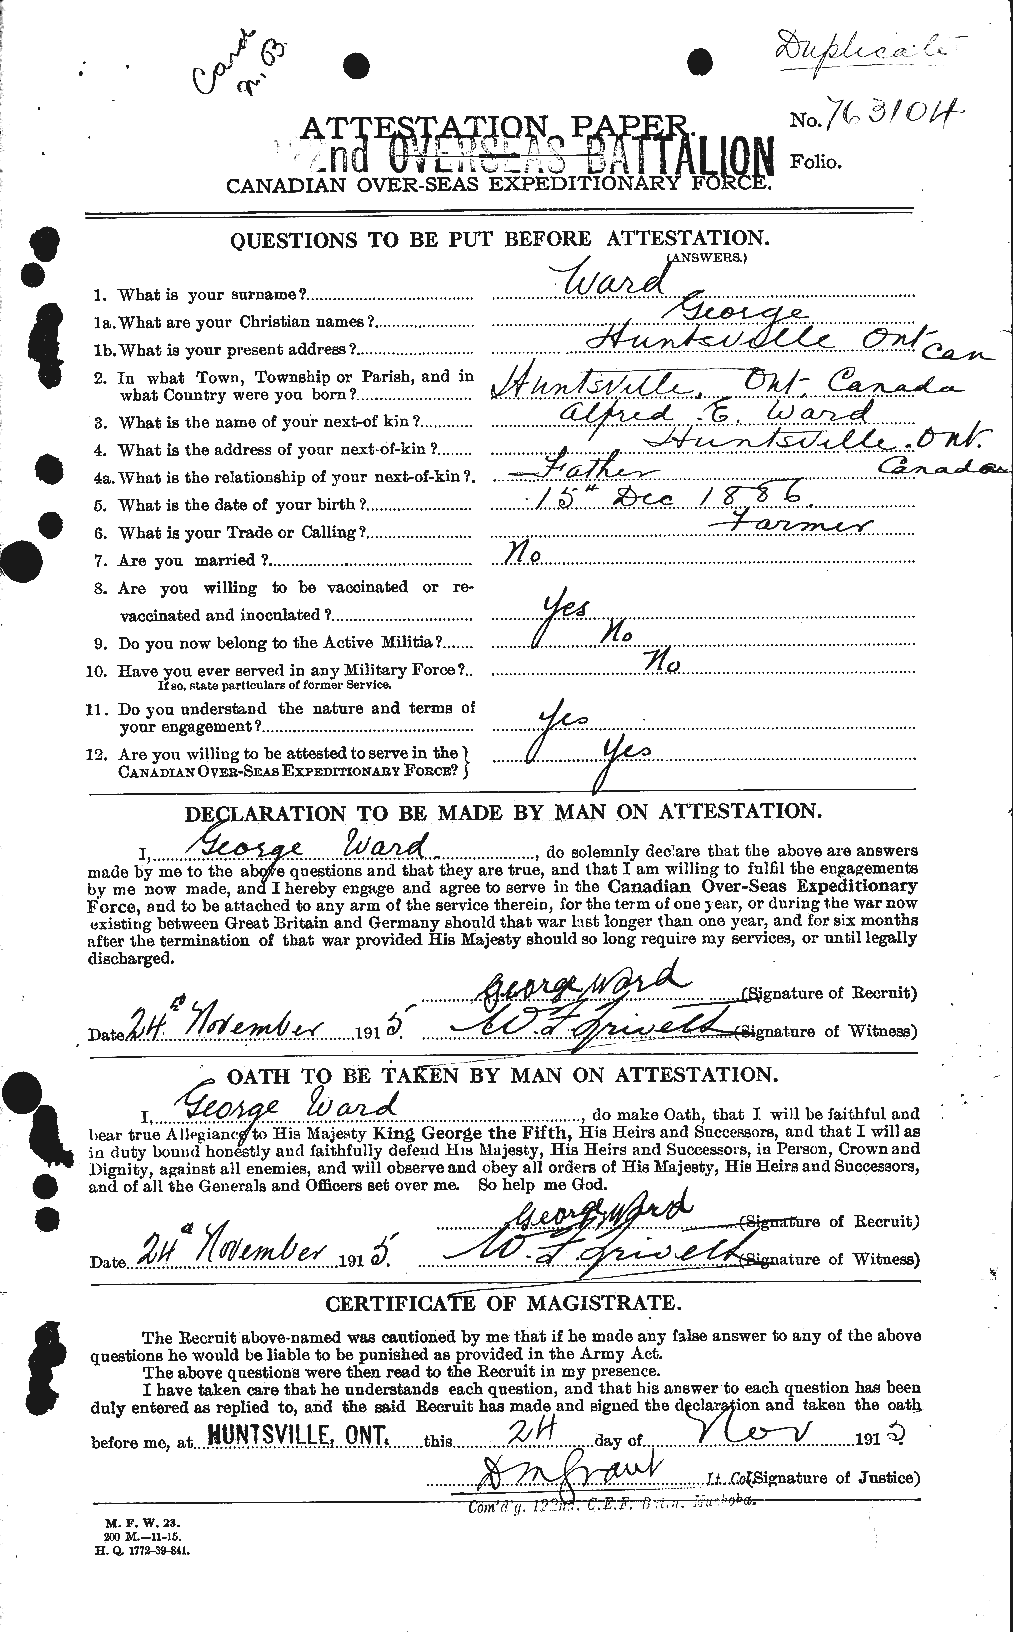 Personnel Records of the First World War - CEF 657757a